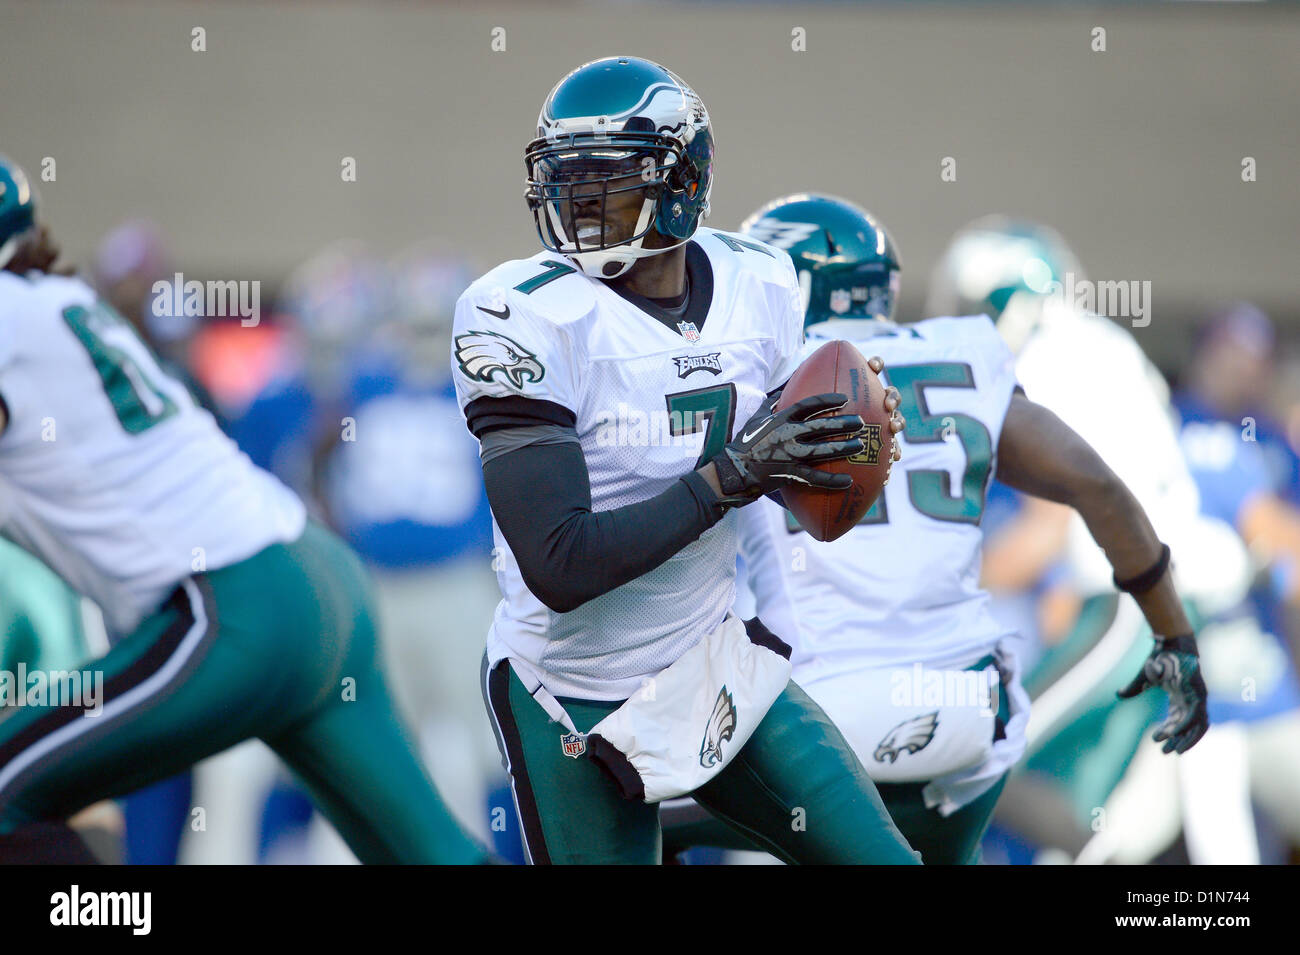 New Jersey, USA. 30 December 2012: Philadelphia Eagles quarterback Michael Vick (7) during a week 17 NFL matchup between the Philadelphia Eagles and New York Giants at MetLife Stadium in East Rutherford, New Jersey. Stock Photo